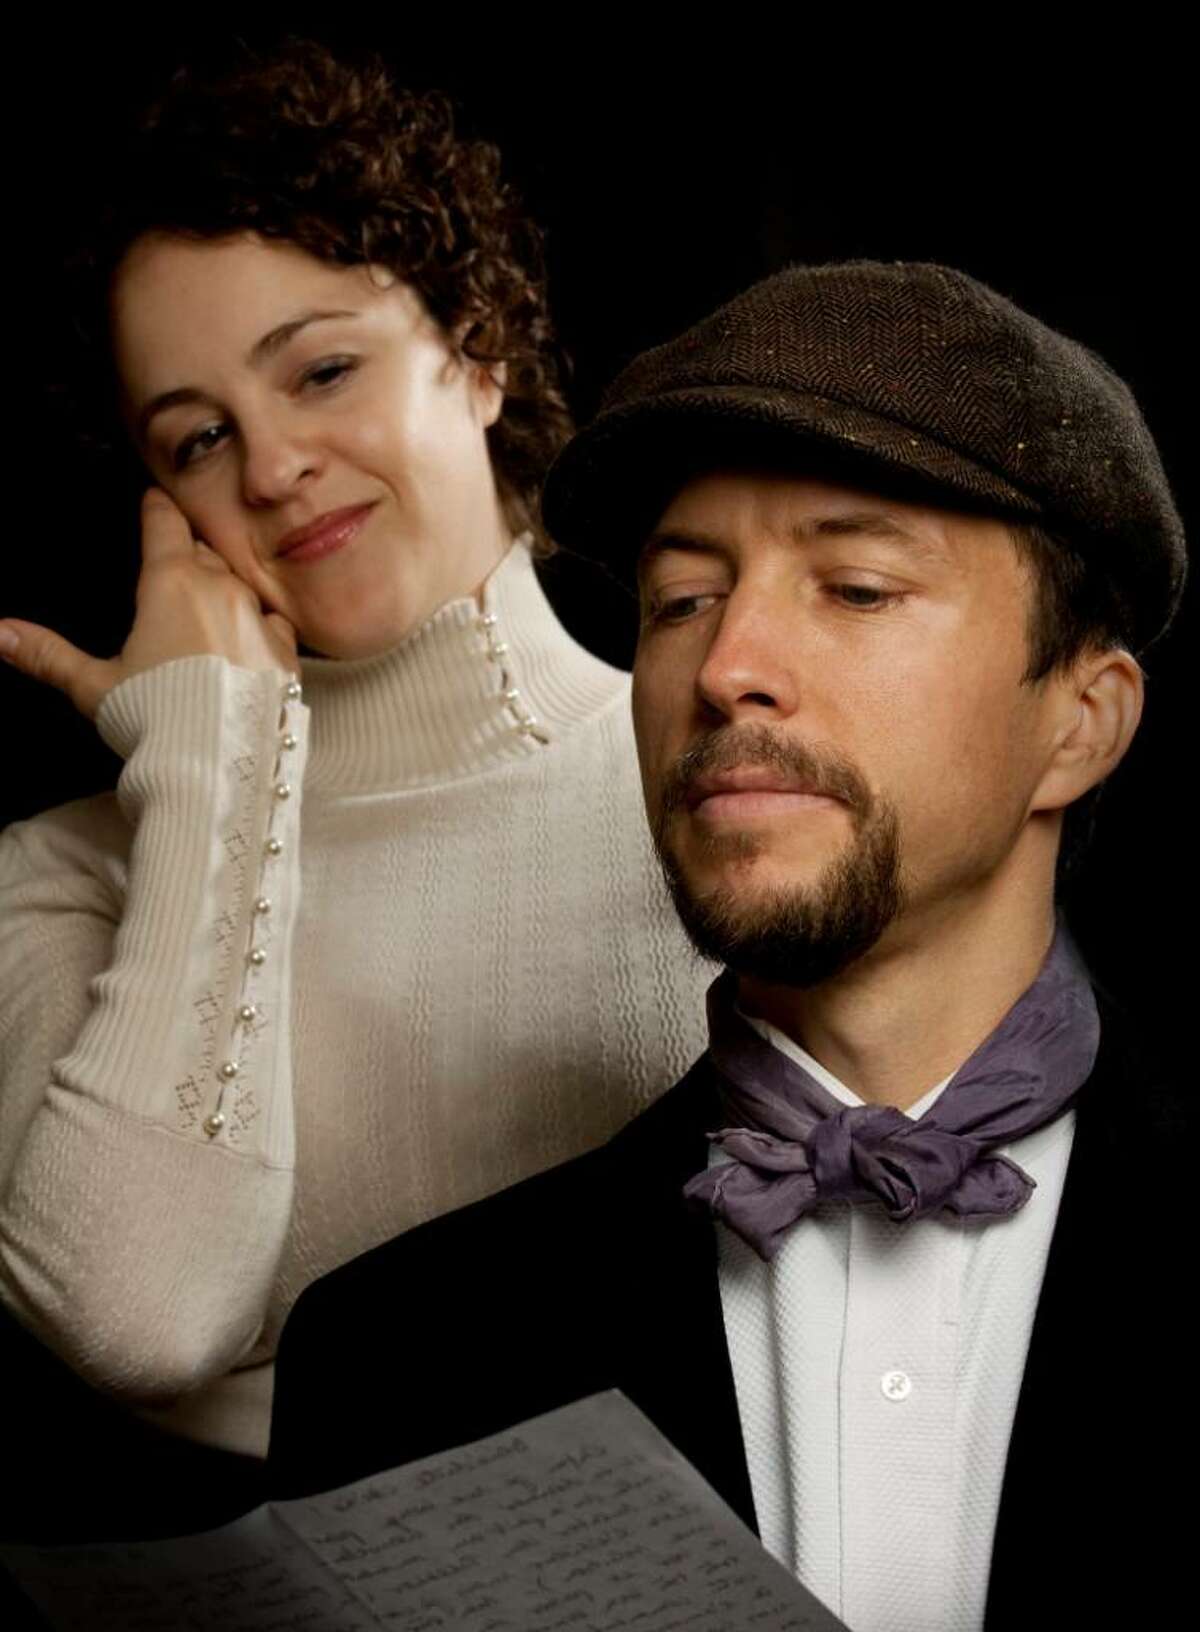 "I Take Your Hand In Mine" tells the love story of Olga Knipper and Anton Chekhov through the couple's love letters. (Walking The Dog Theater)